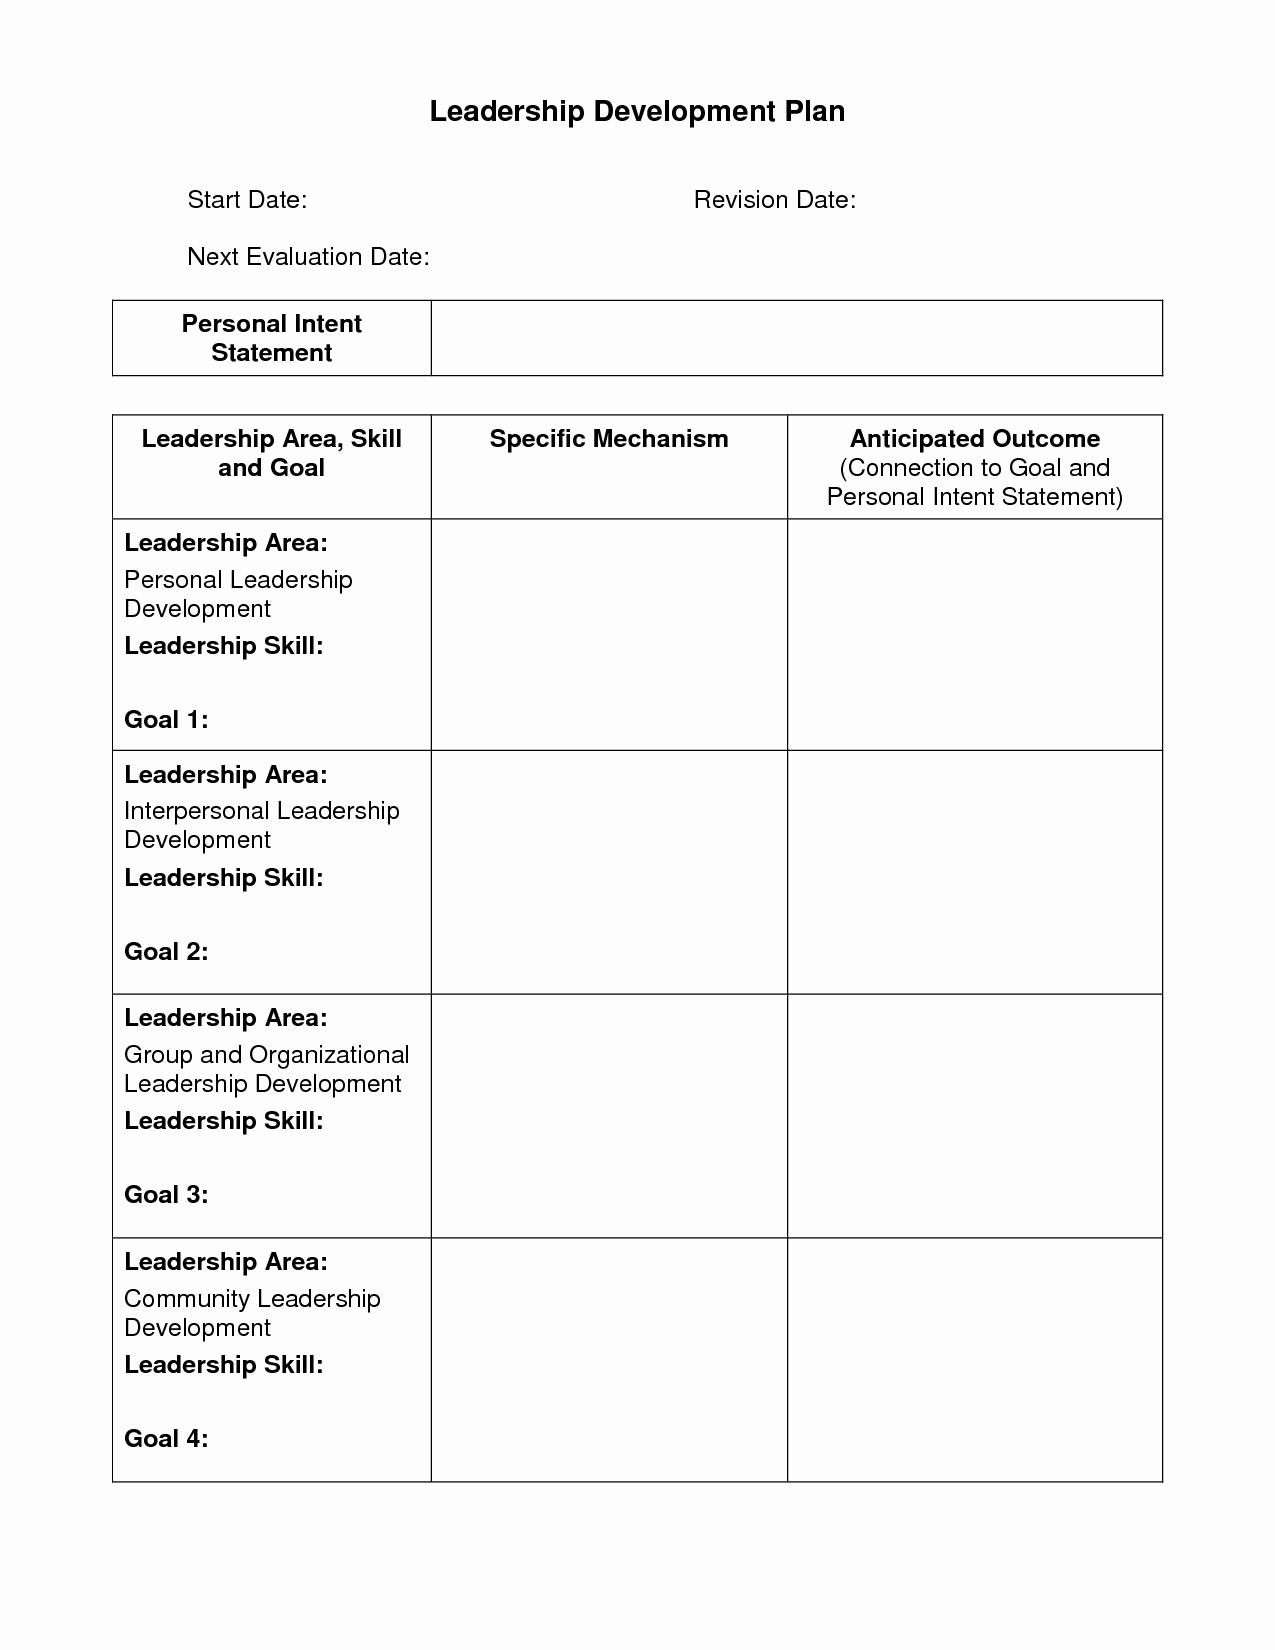 Personalized Learning Plan Template Unique Personal Development Plan Templates Google Search